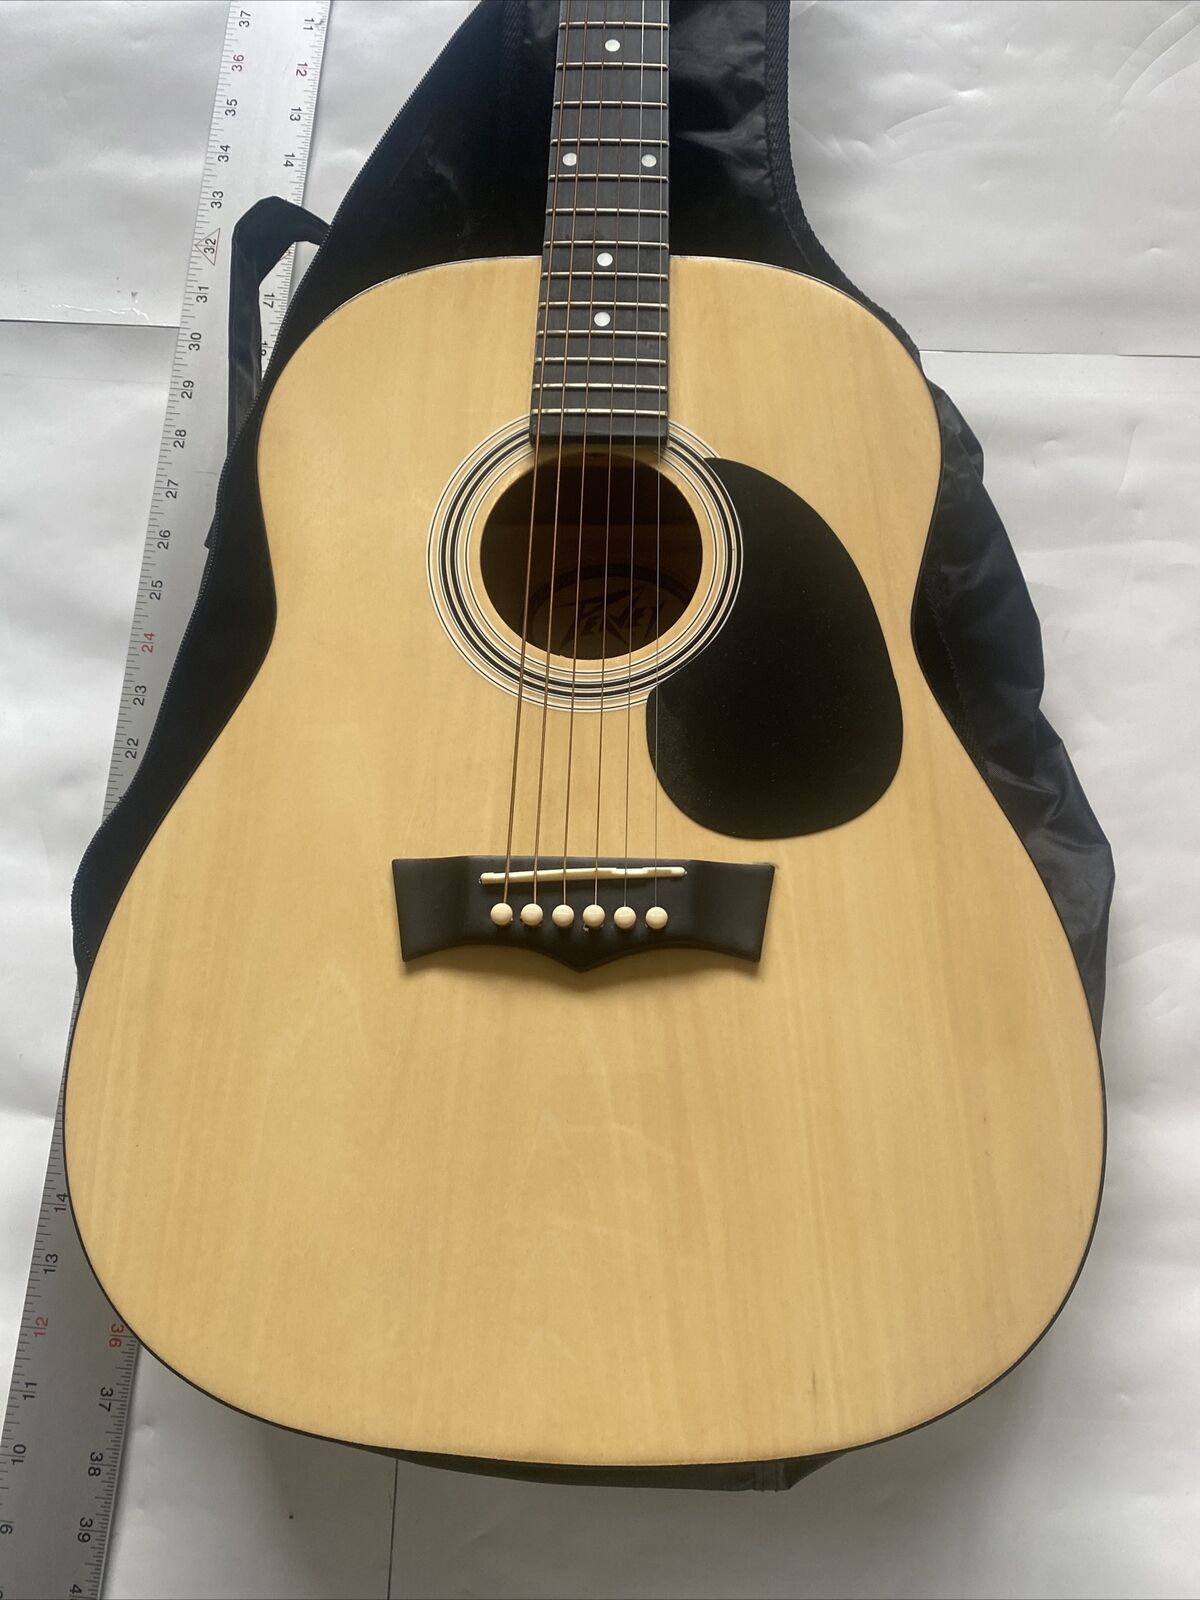 peavey acoustic guitar used With Peavey Soft Case 2